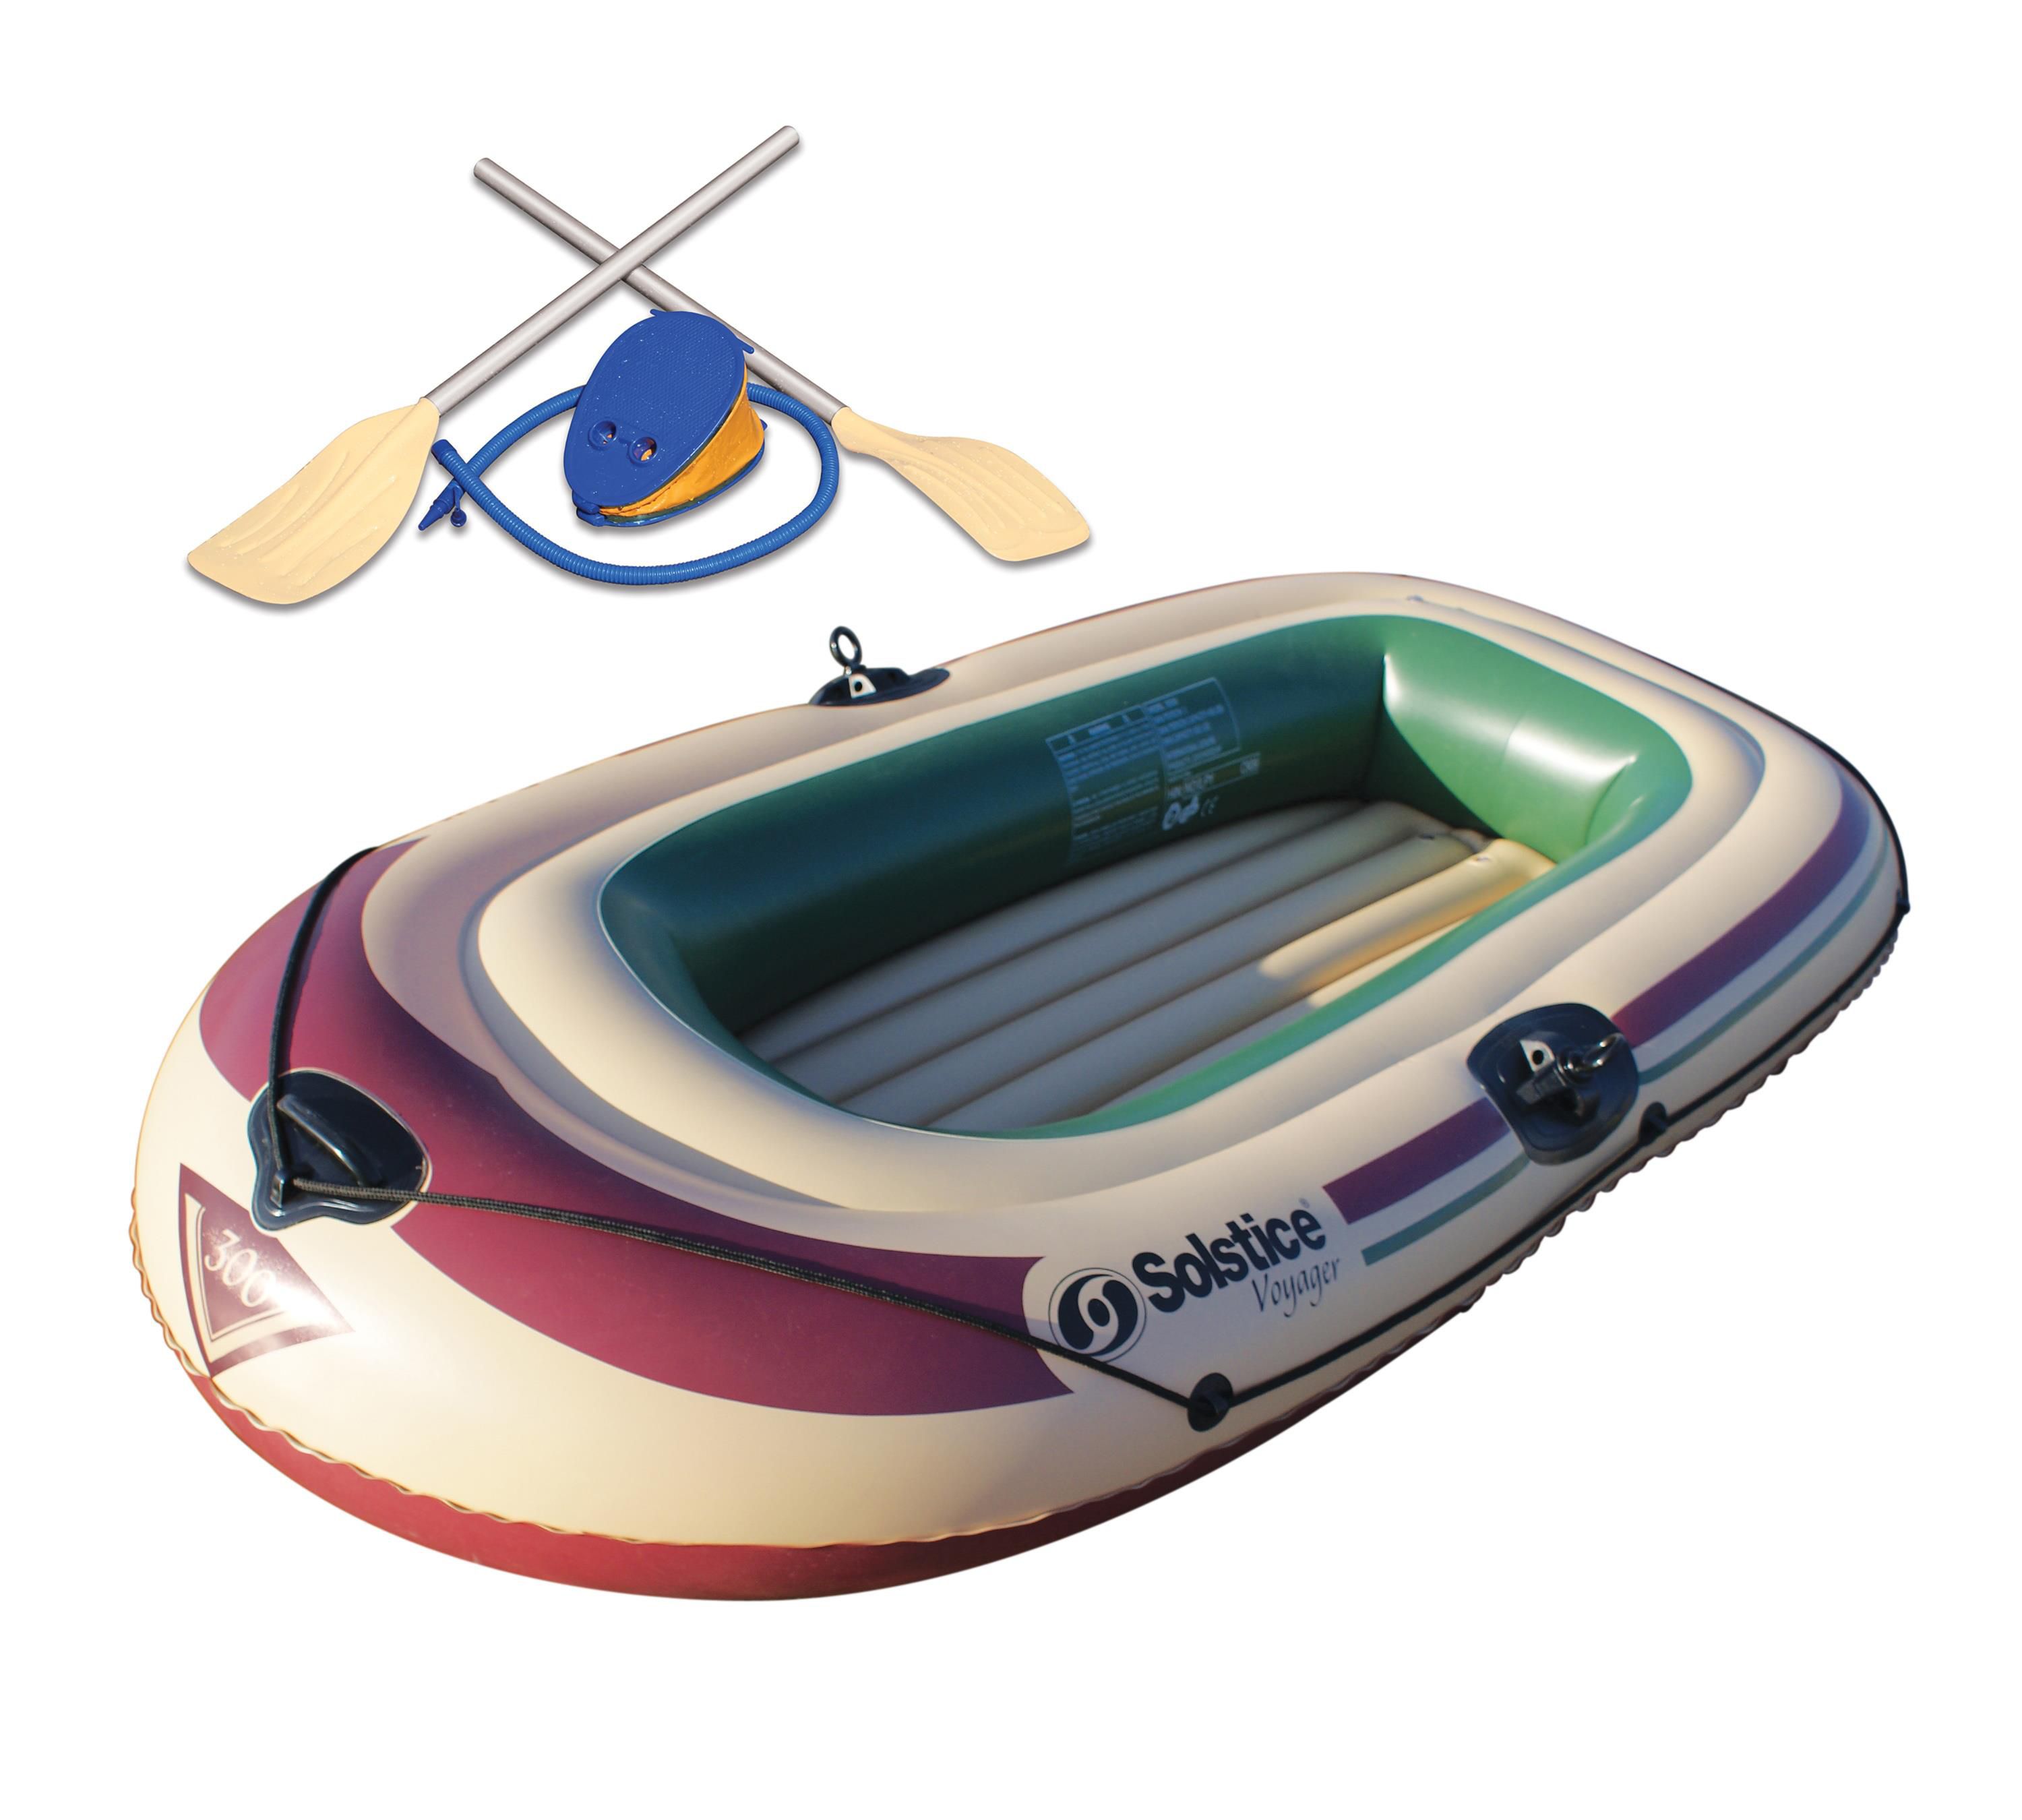  Solstice Voyager Inflatable Boat - 6-Person : Open